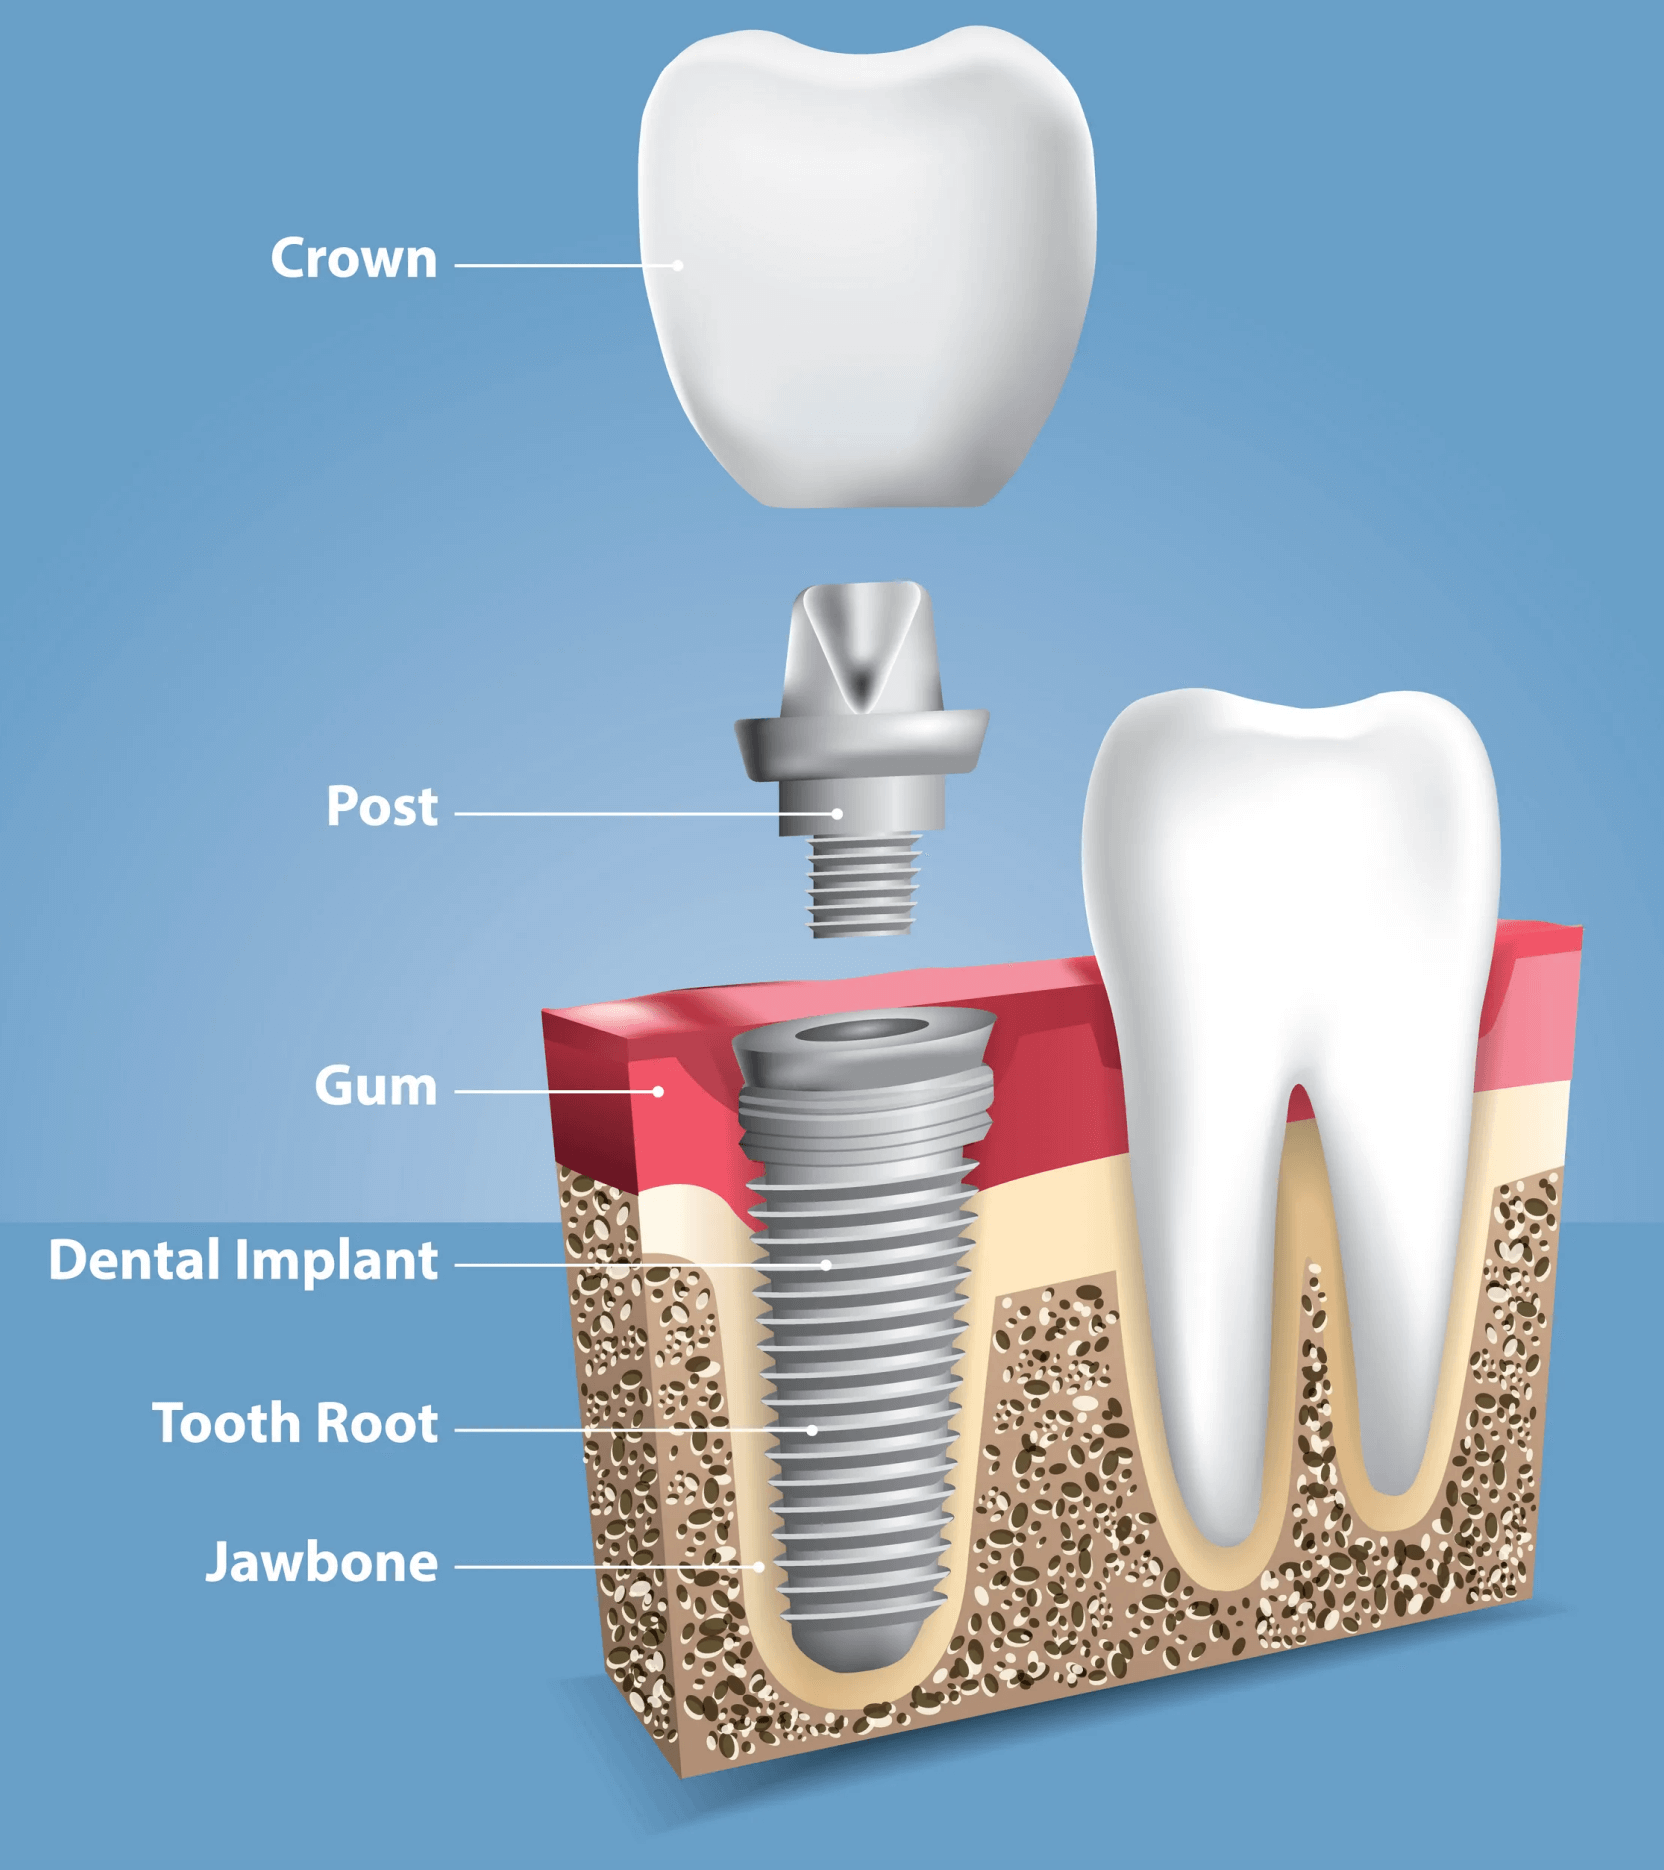 Showing the Crown, Post, Gum, Dental Implant, Tooth Root, and Jawbone in the mouth